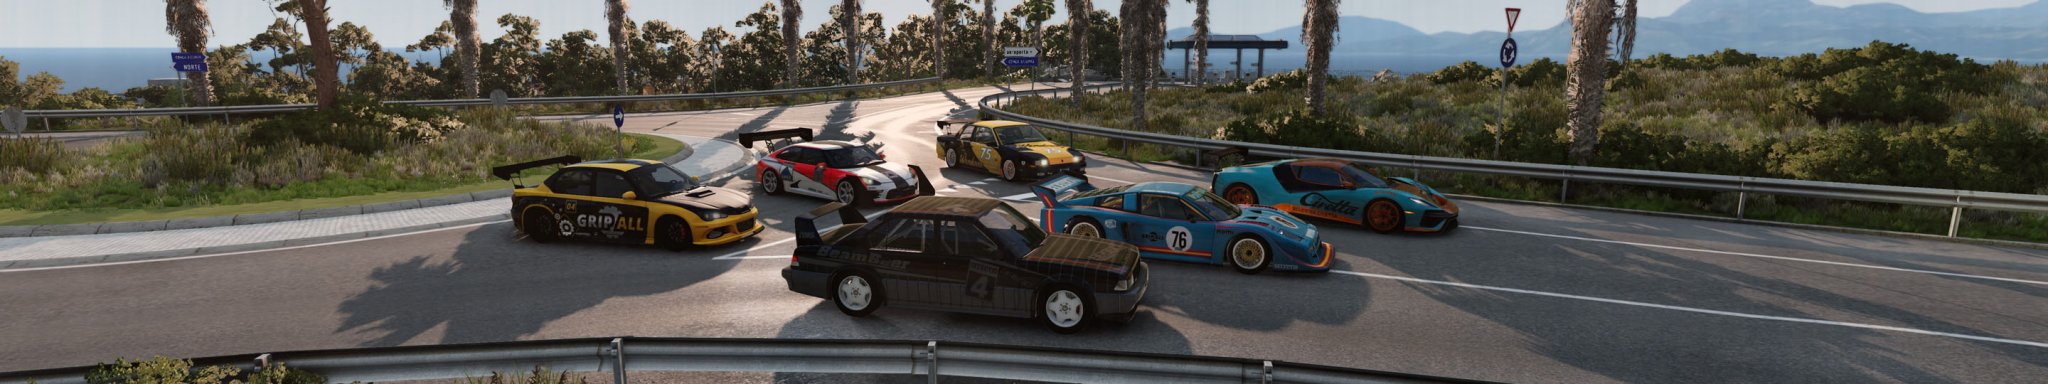 0 BeamNG ITALY Freeway Run ROUTE A with VARIOUS CARS copy.jpg